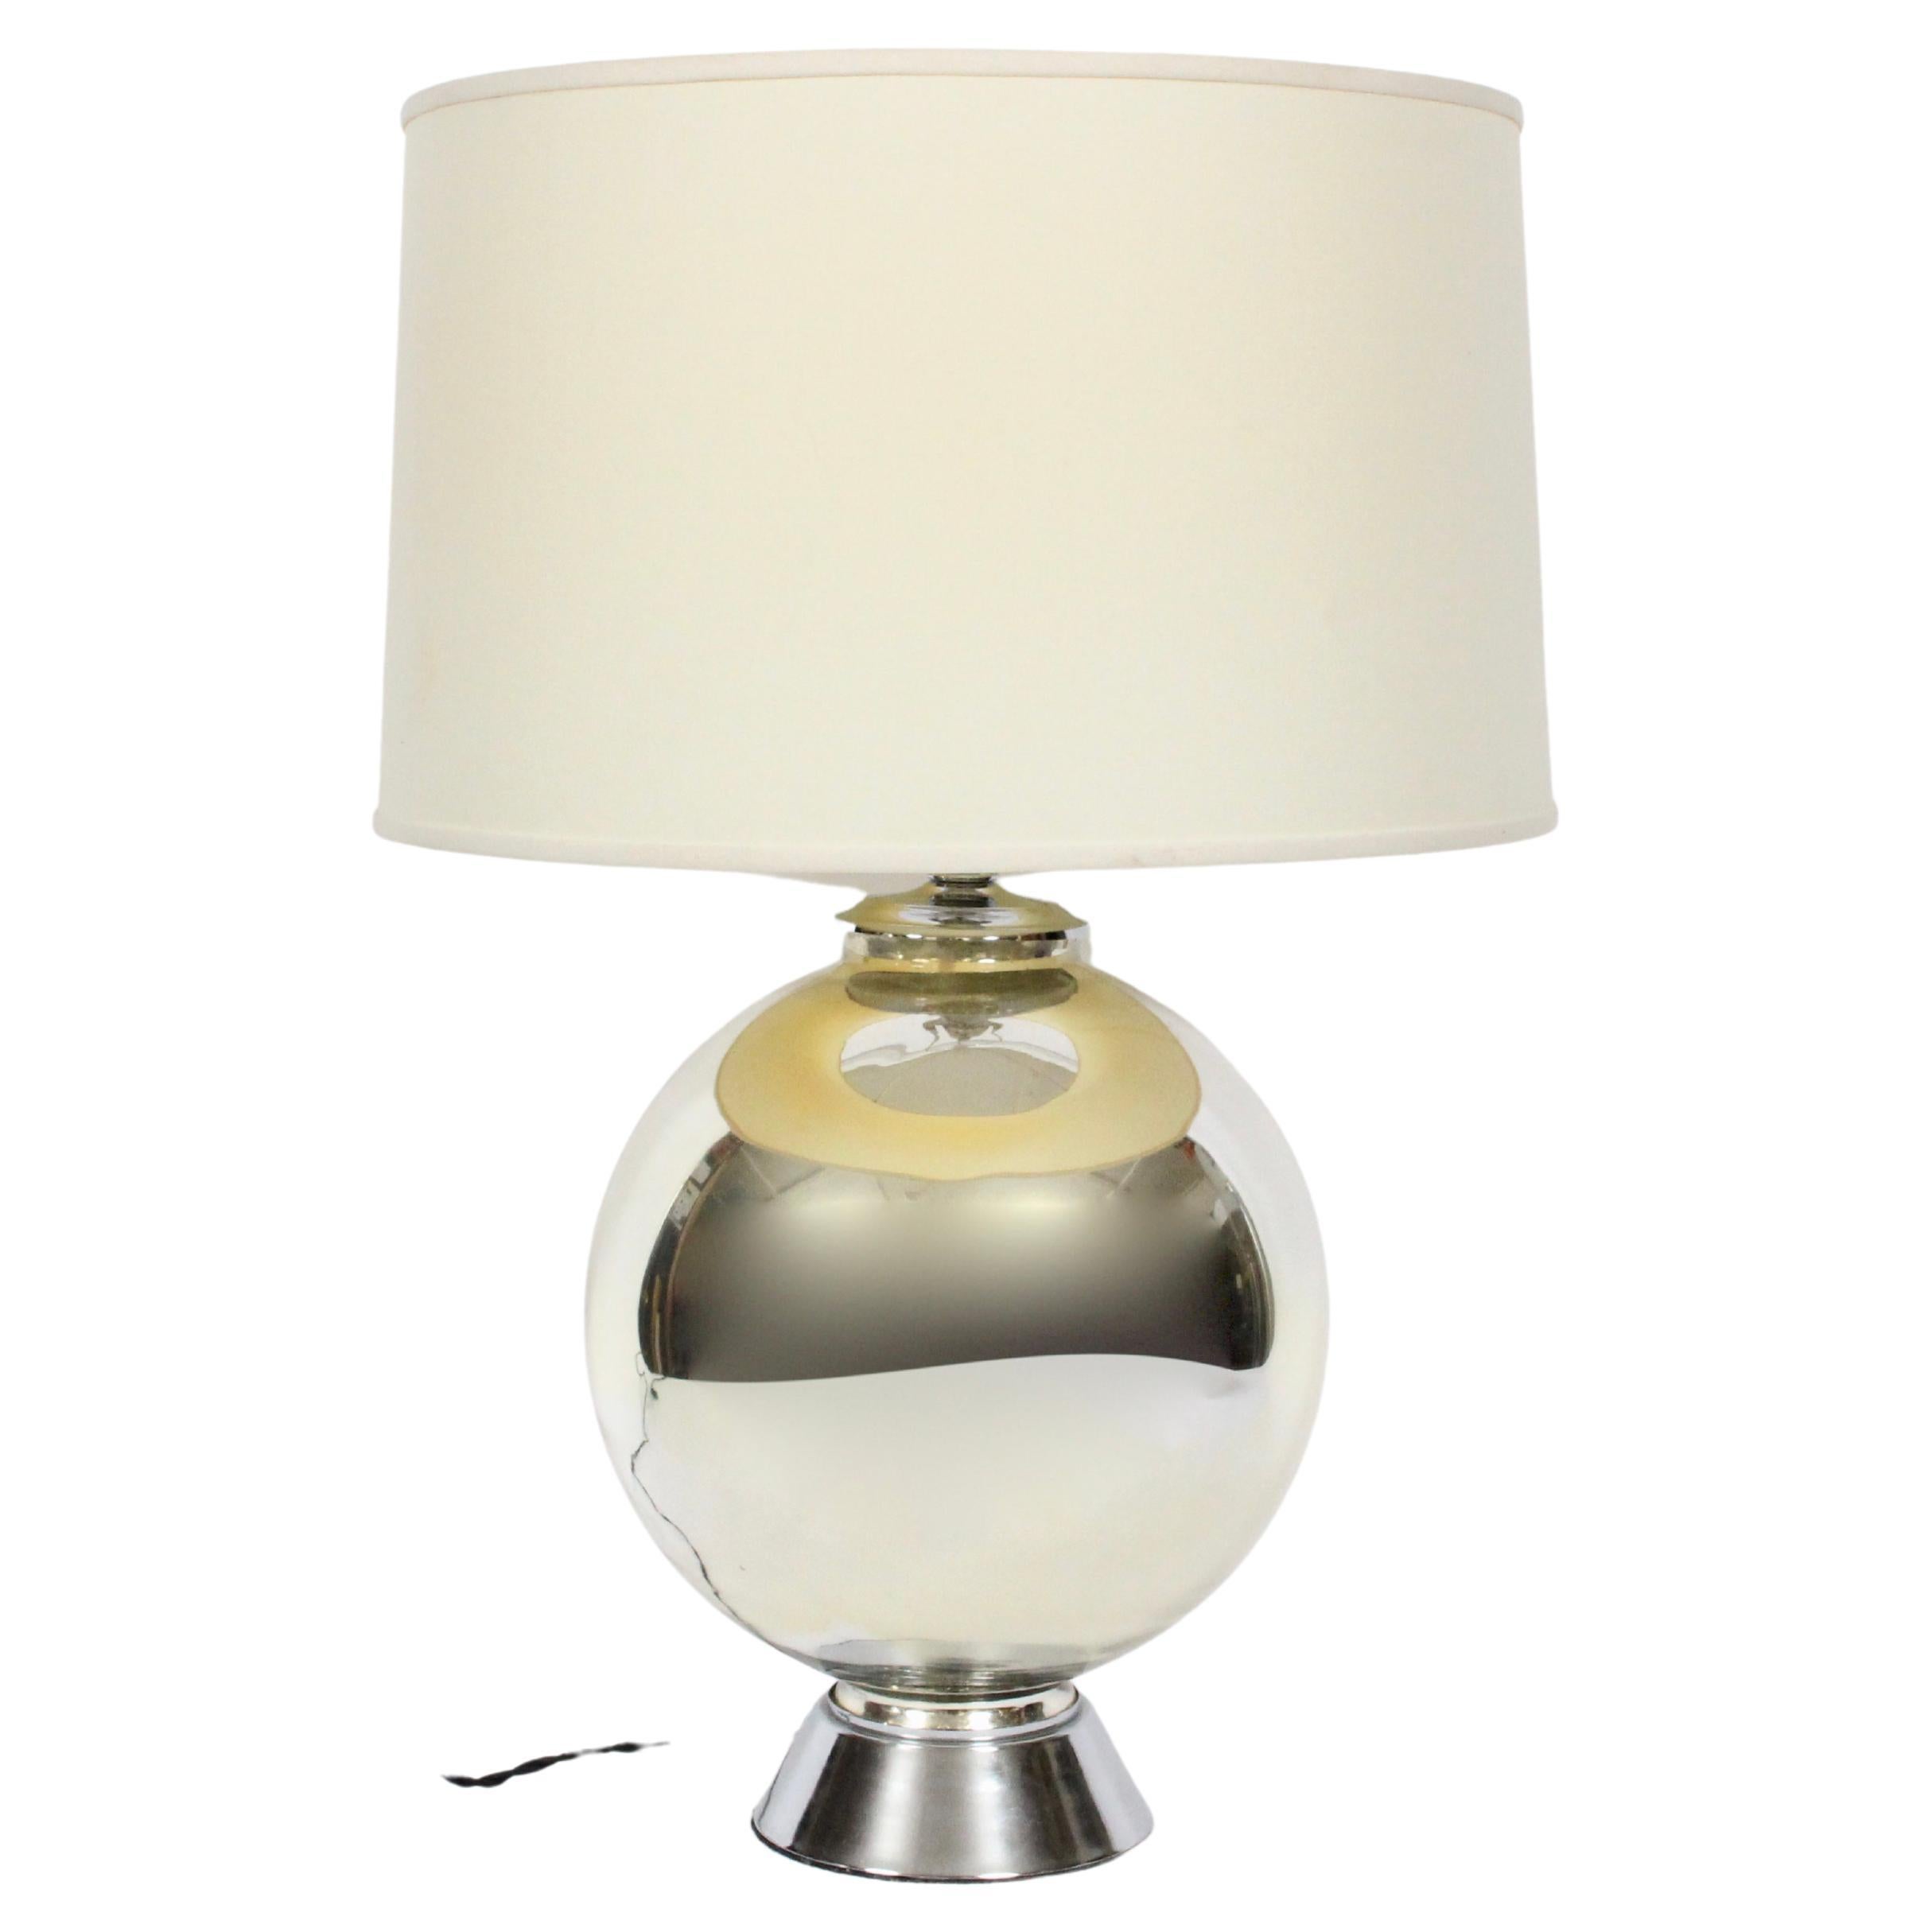 Chapman Manufacturing Co. attributed Mercury glass lamp. Featuring a reflective ball form atop a round, tapered Nickel plated 6D base. Ball 20H to top of socket. Shade shown for display only and not for sale (11 H x 17 D top x 18 D bottom). Bedside.